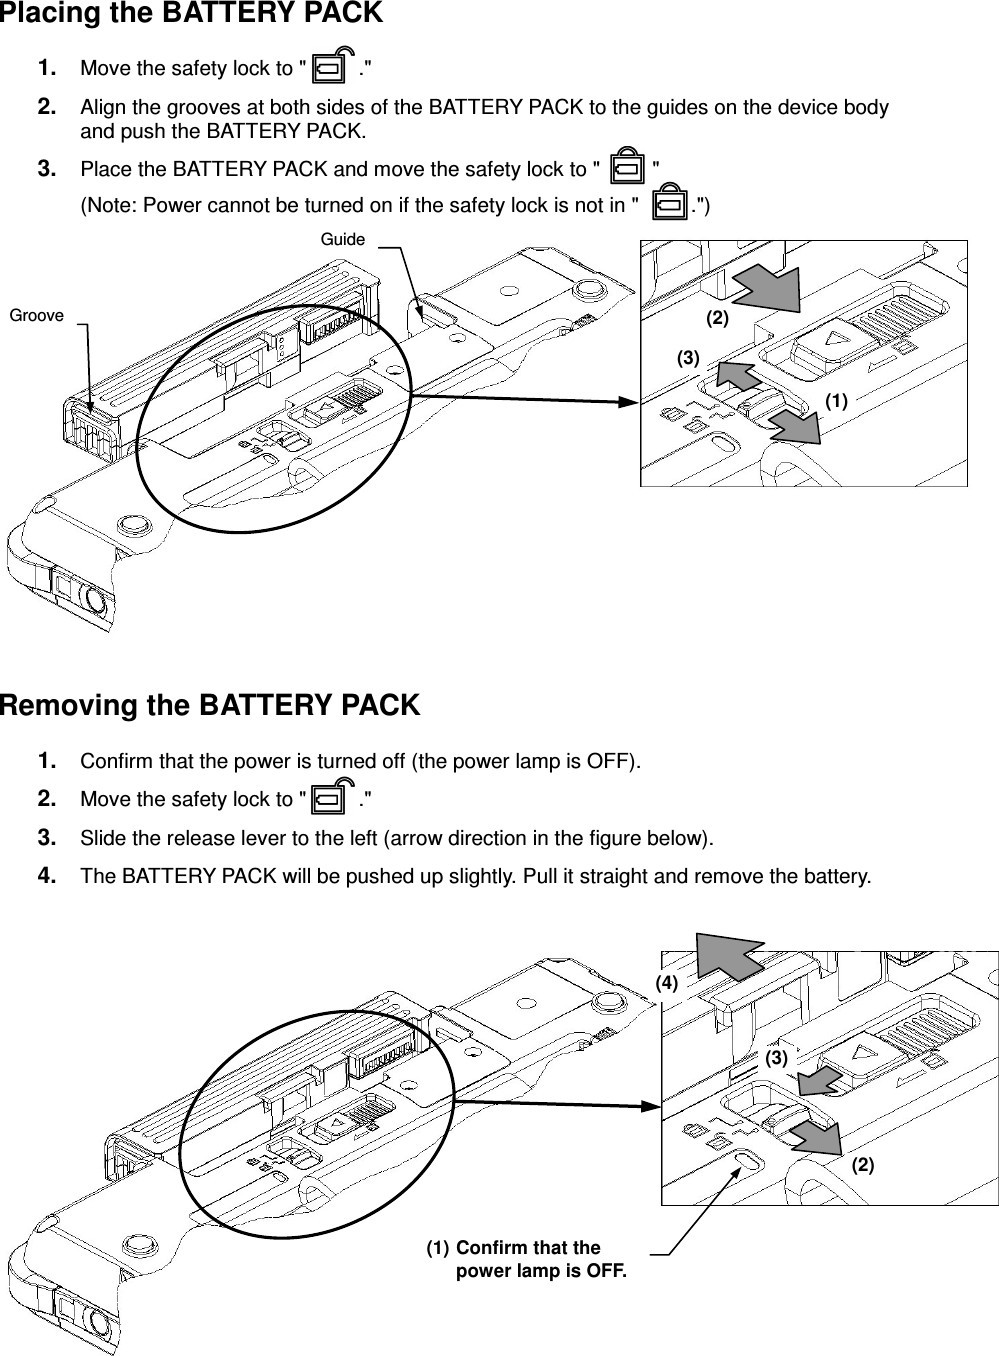 - 15 - Placing the BATTERY PACK 1.  Move the safety lock to &quot;         .&quot; 2.  Align the grooves at both sides of the BATTERY PACK to the guides on the device body and push the BATTERY PACK. 3.  Place the BATTERY PACK and move the safety lock to &quot;         &quot; (Note: Power cannot be turned on if the safety lock is not in &quot;         .&quot;)             Removing the BATTERY PACK 1.  Confirm that the power is turned off (the power lamp is OFF). 2.  Move the safety lock to &quot;         .&quot; 3.  Slide the release lever to the left (arrow direction in the figure below). 4.  The BATTERY PACK will be pushed up slightly. Pull it straight and remove the battery.         Groove Guide (1) (2) (3)  (2) (3) (4) (1) Confirm that the power lamp is OFF.   